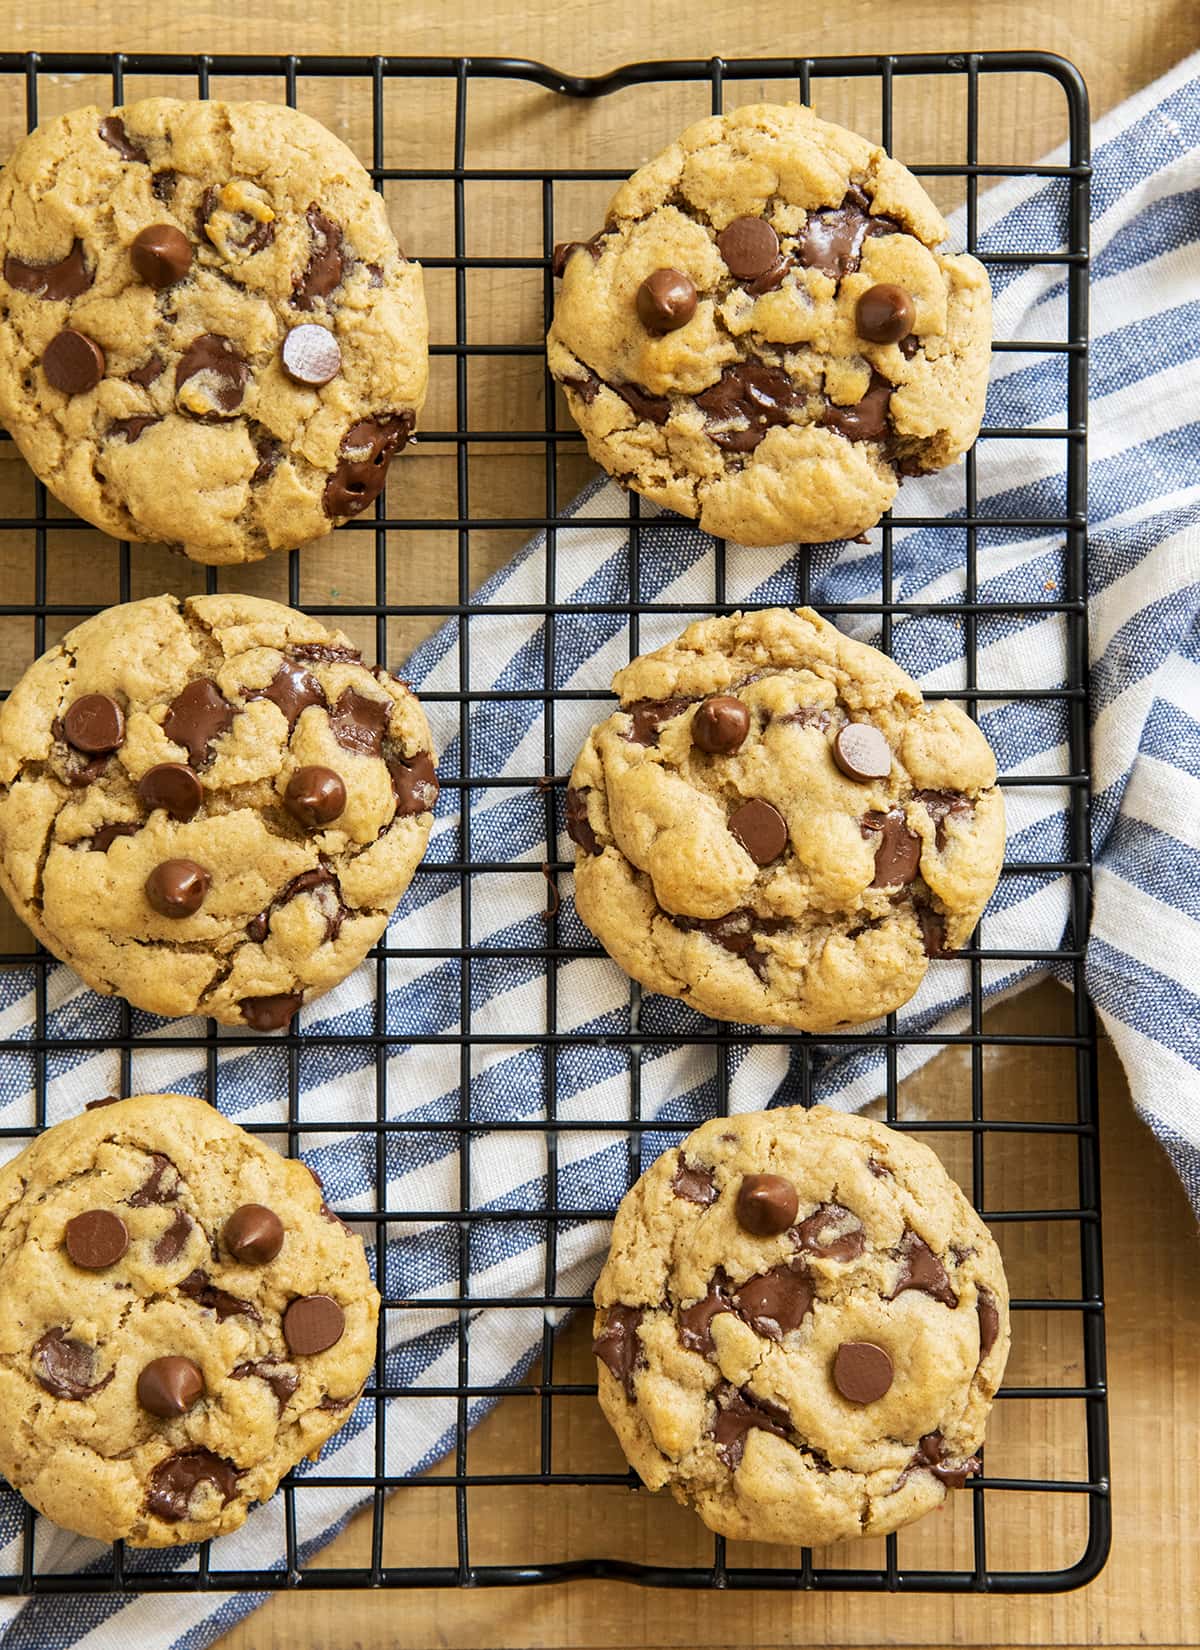 Chocolate chip cookies made with applesauce on a cooling rack.